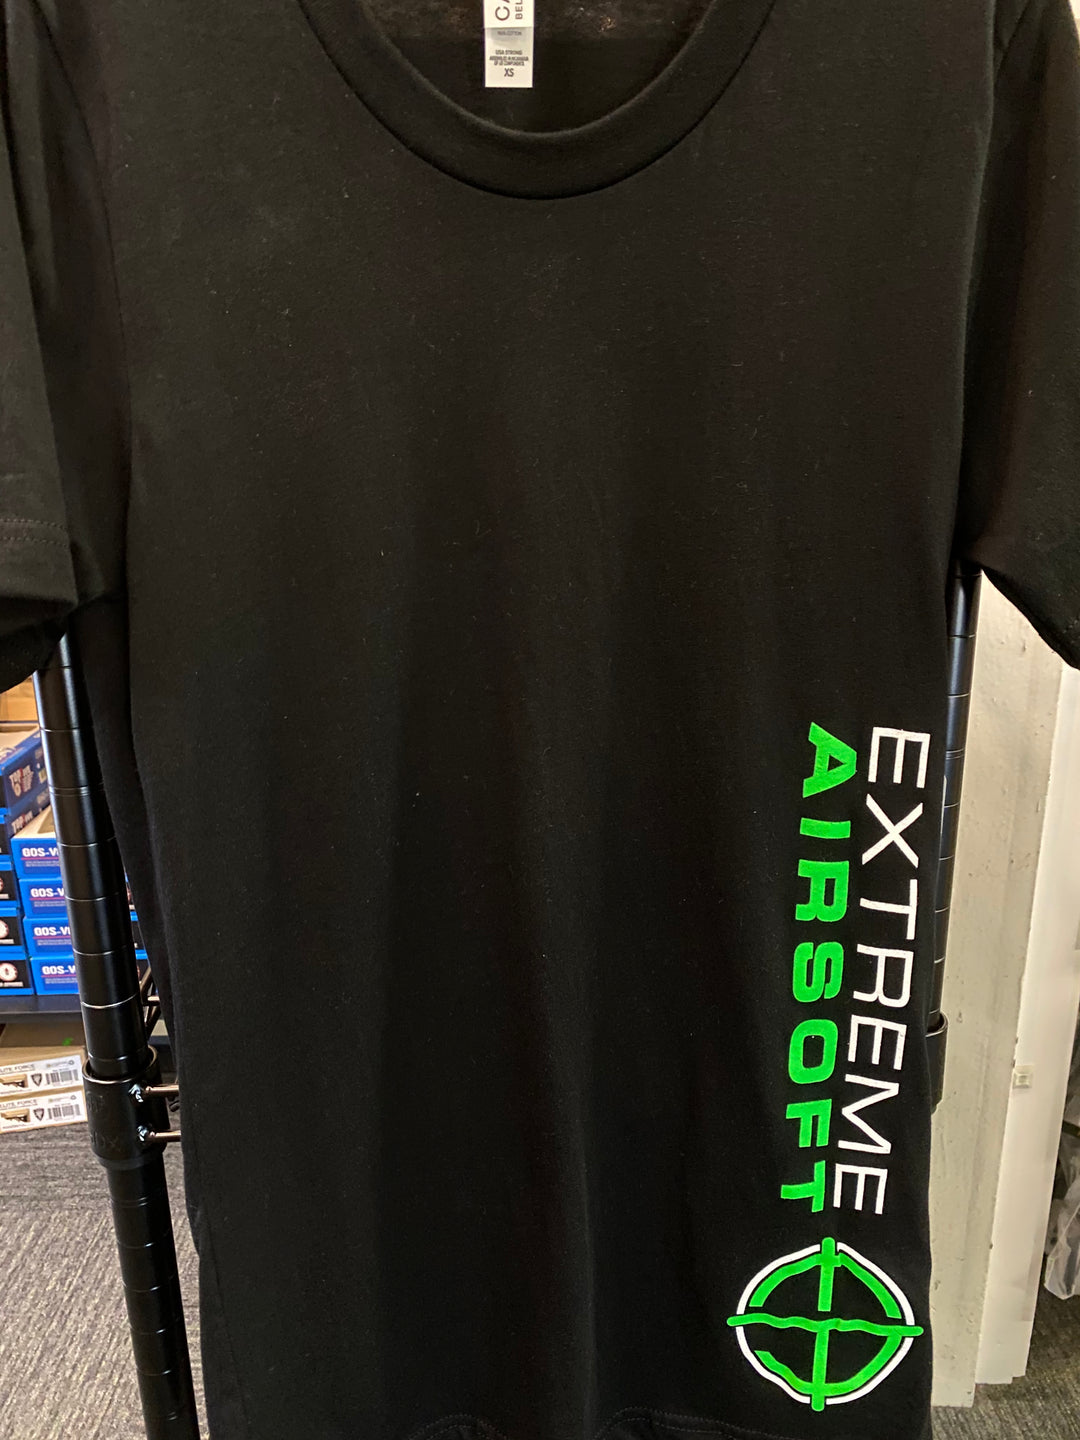 Extreme Airsoft T-Shirt